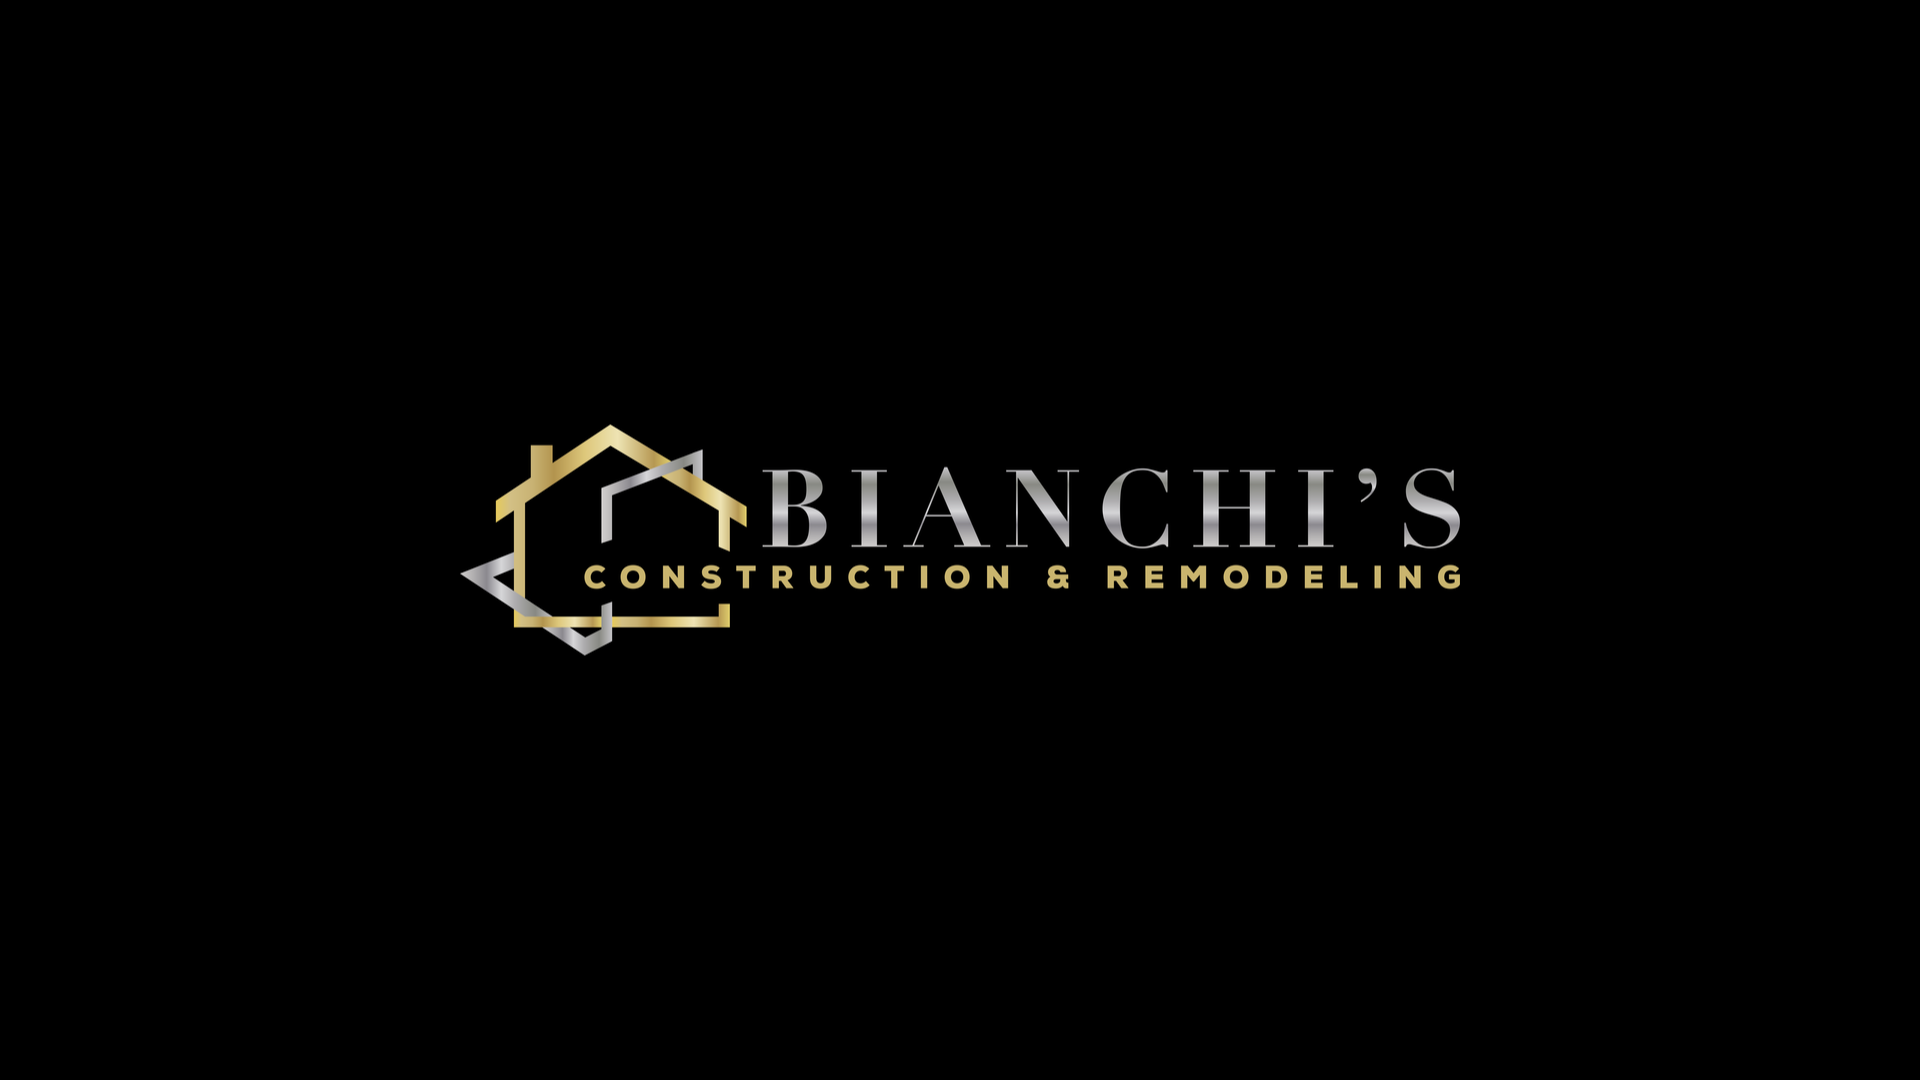 BIANCHI'S CONSTRUCTION & REMODELING